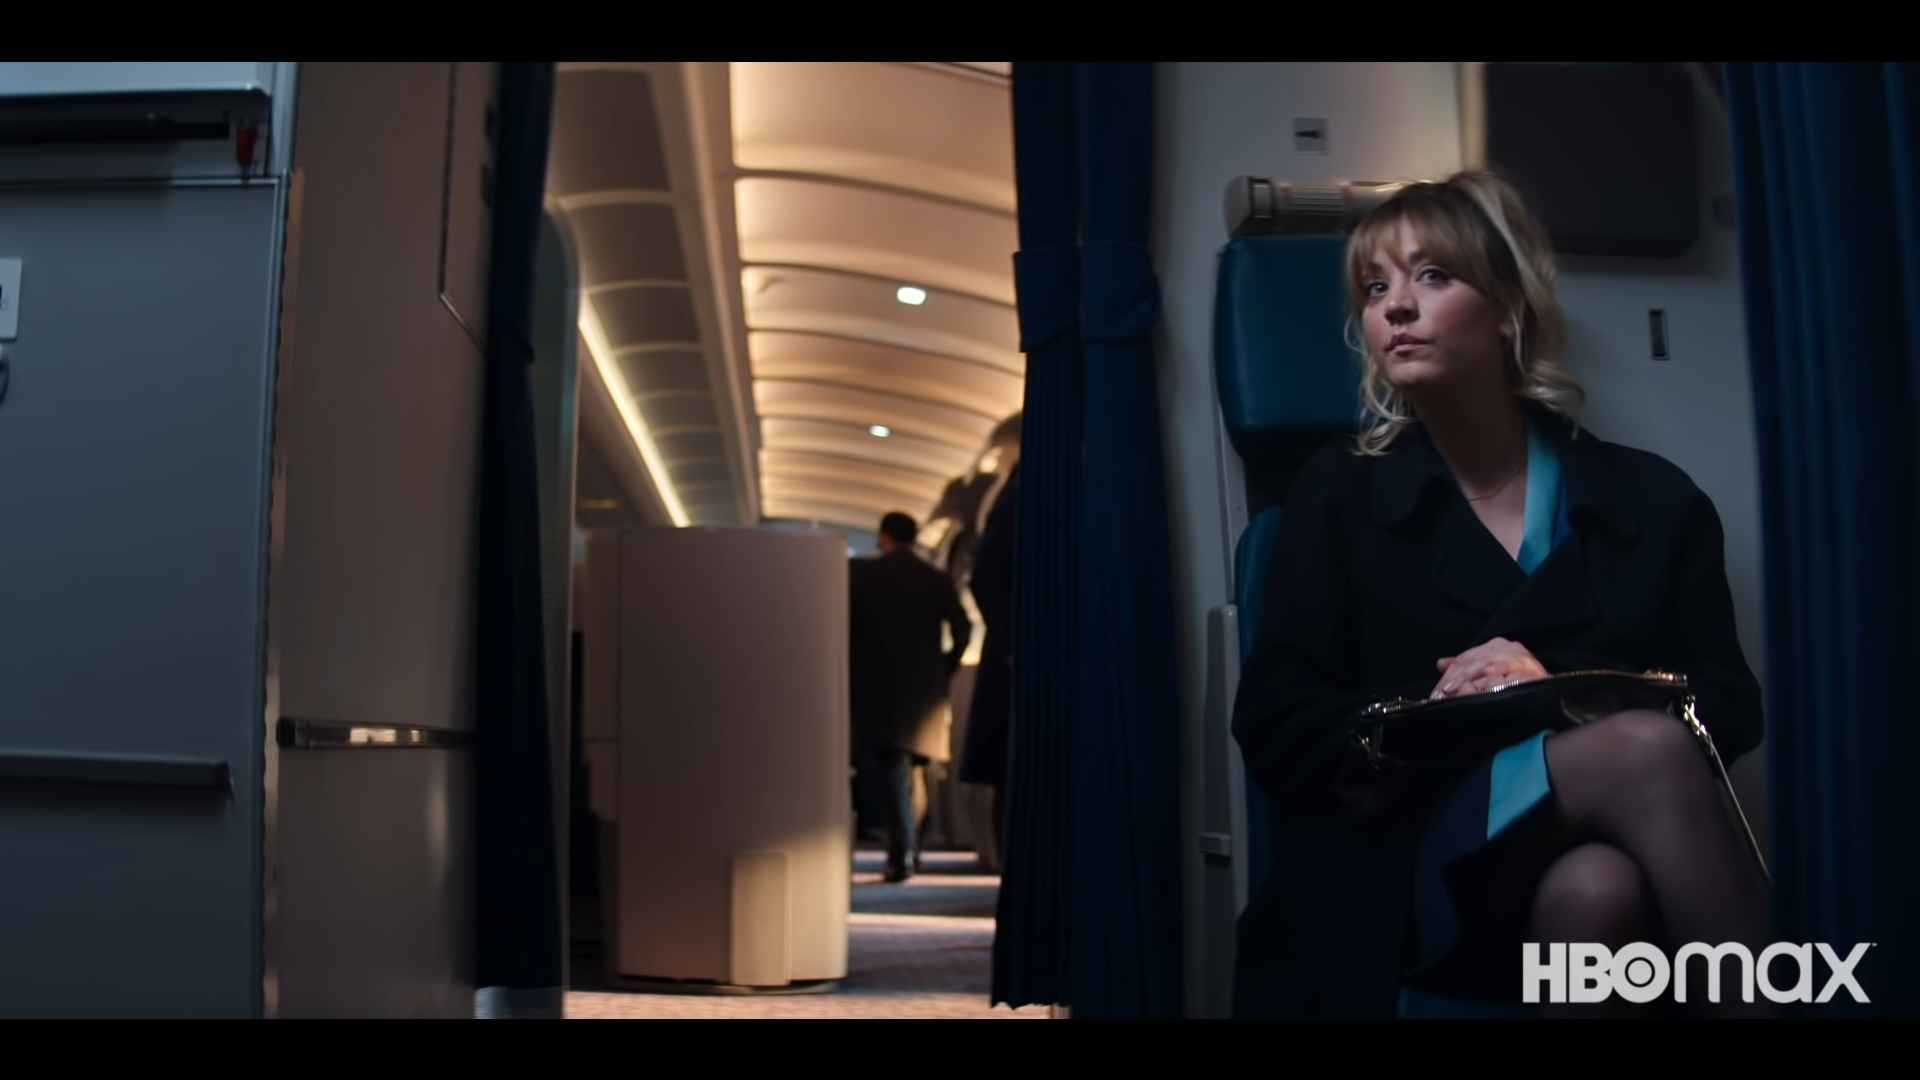 The HBO Max Brings The Second Season Of The Flight Attendant